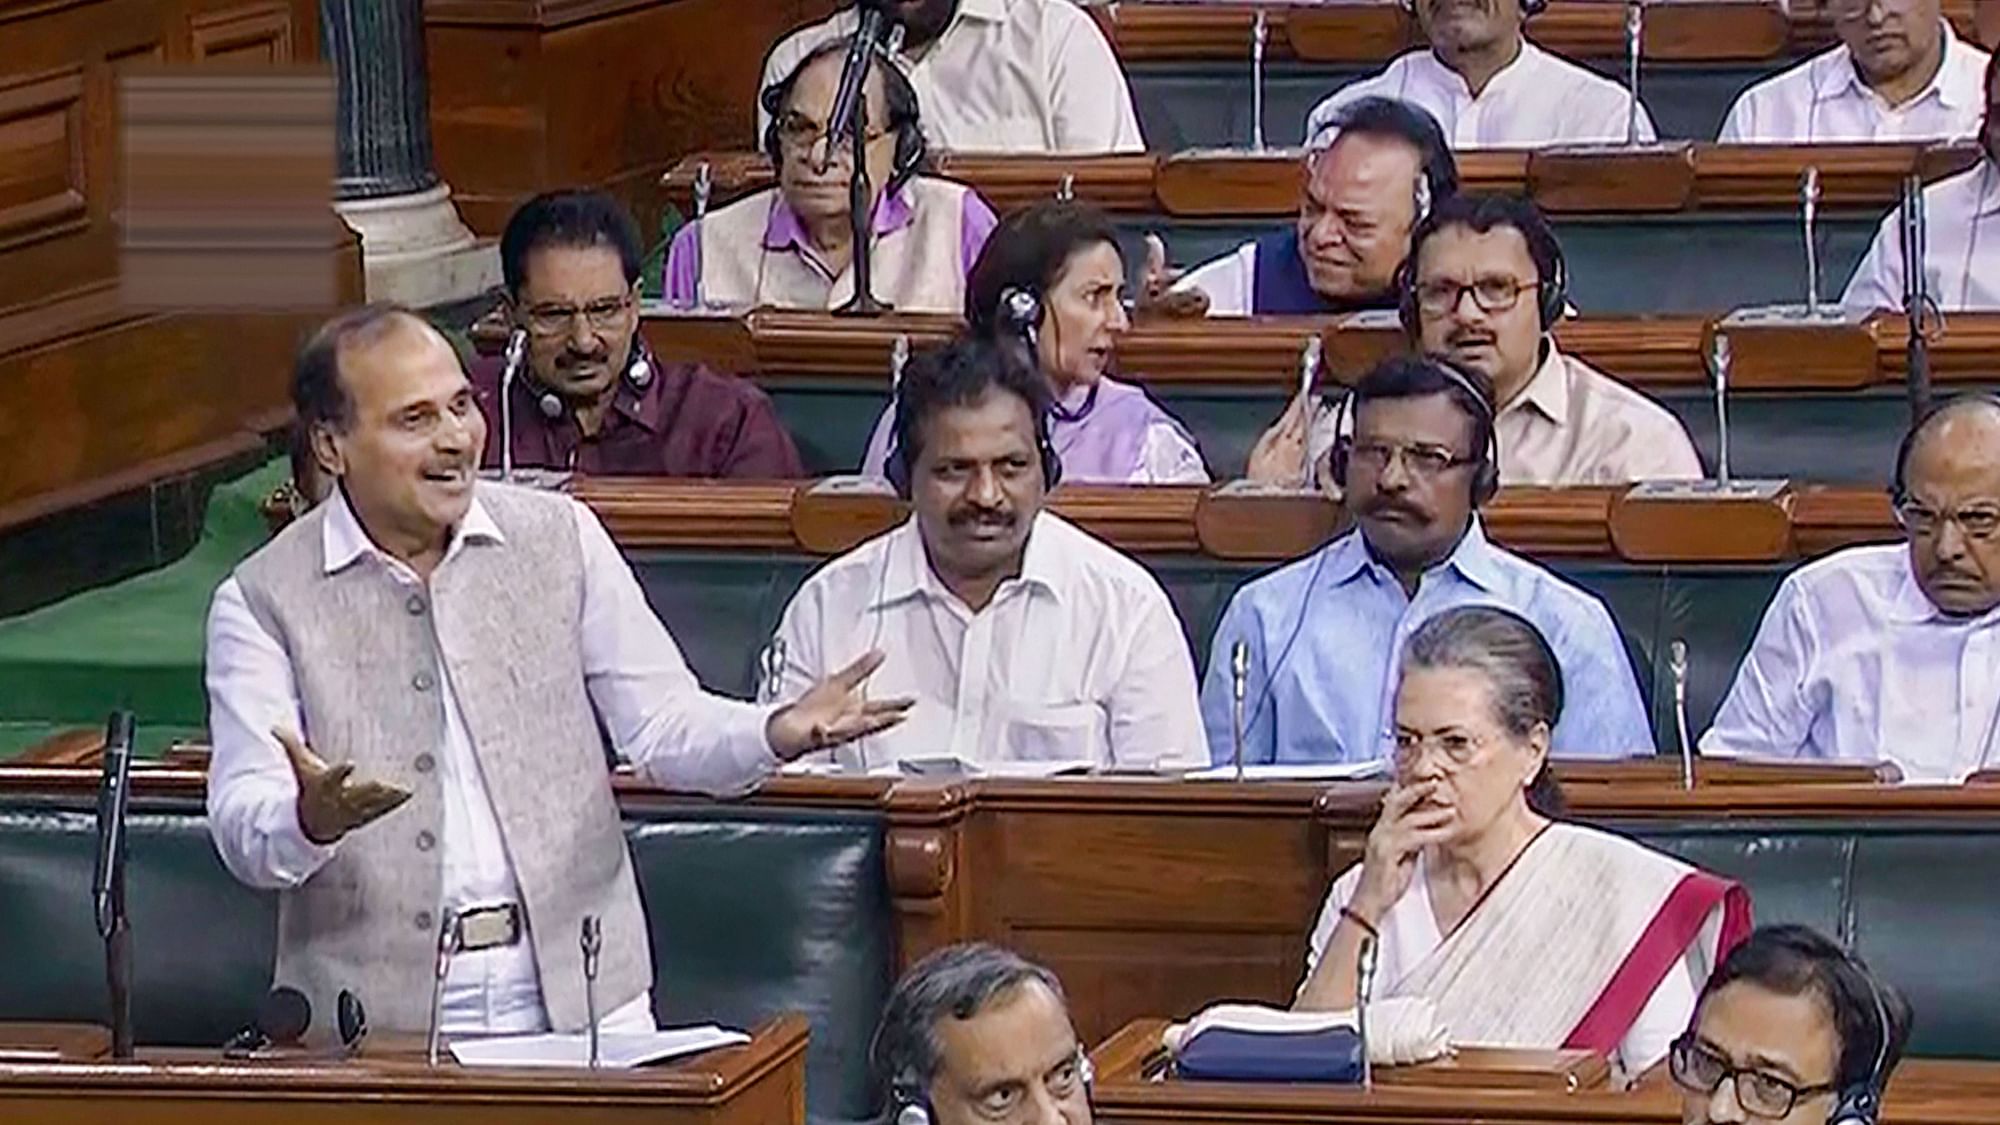 Congress MP Adhir Ranjan Chowdhury speaks in the Lok Sabha during the ongoing Session of Parliament in New Delhi on 6 August.&nbsp;